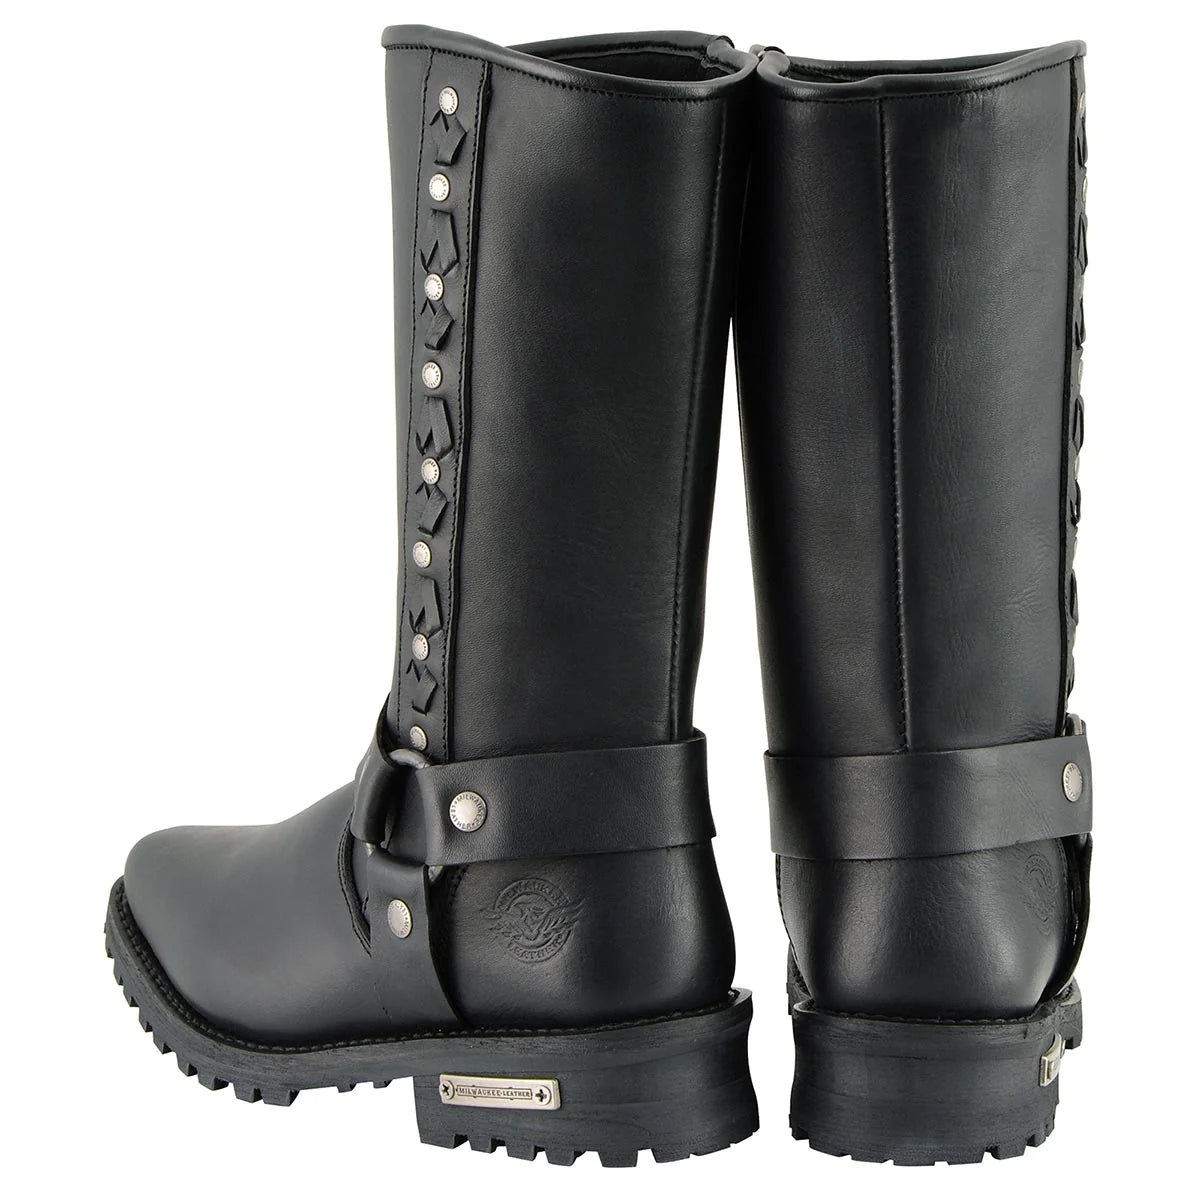 Men's Black Harness Boots with Braid and Riveted Details